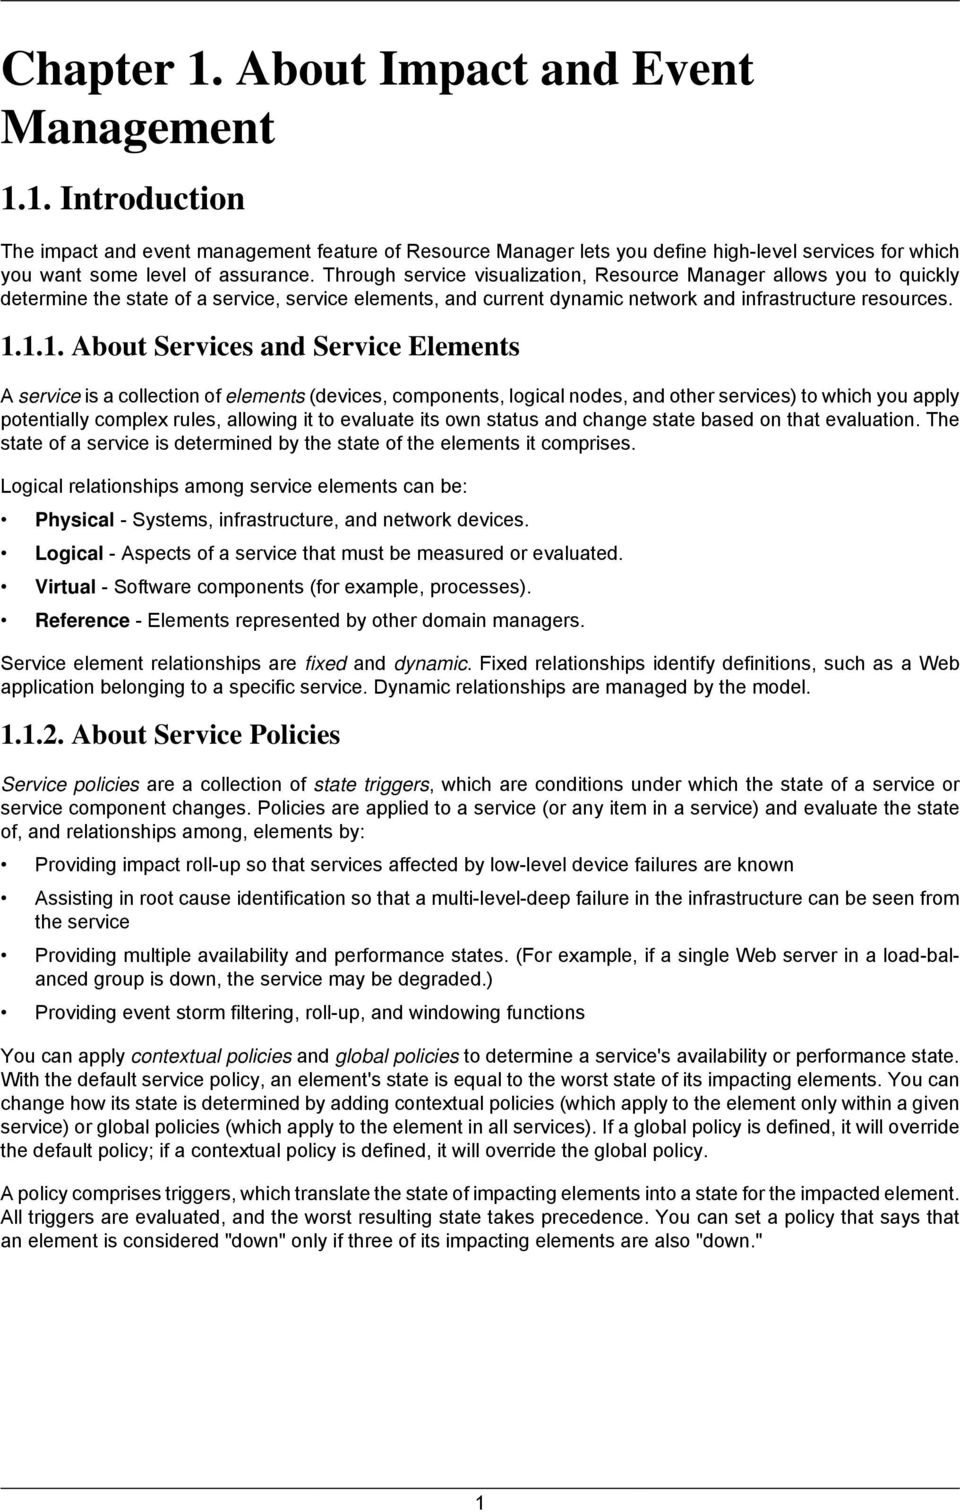 1.1. About Services and Service Elements A service is a collection of elements (devices, components, logical nodes, and other services) to which you apply potentially complex rules, allowing it to